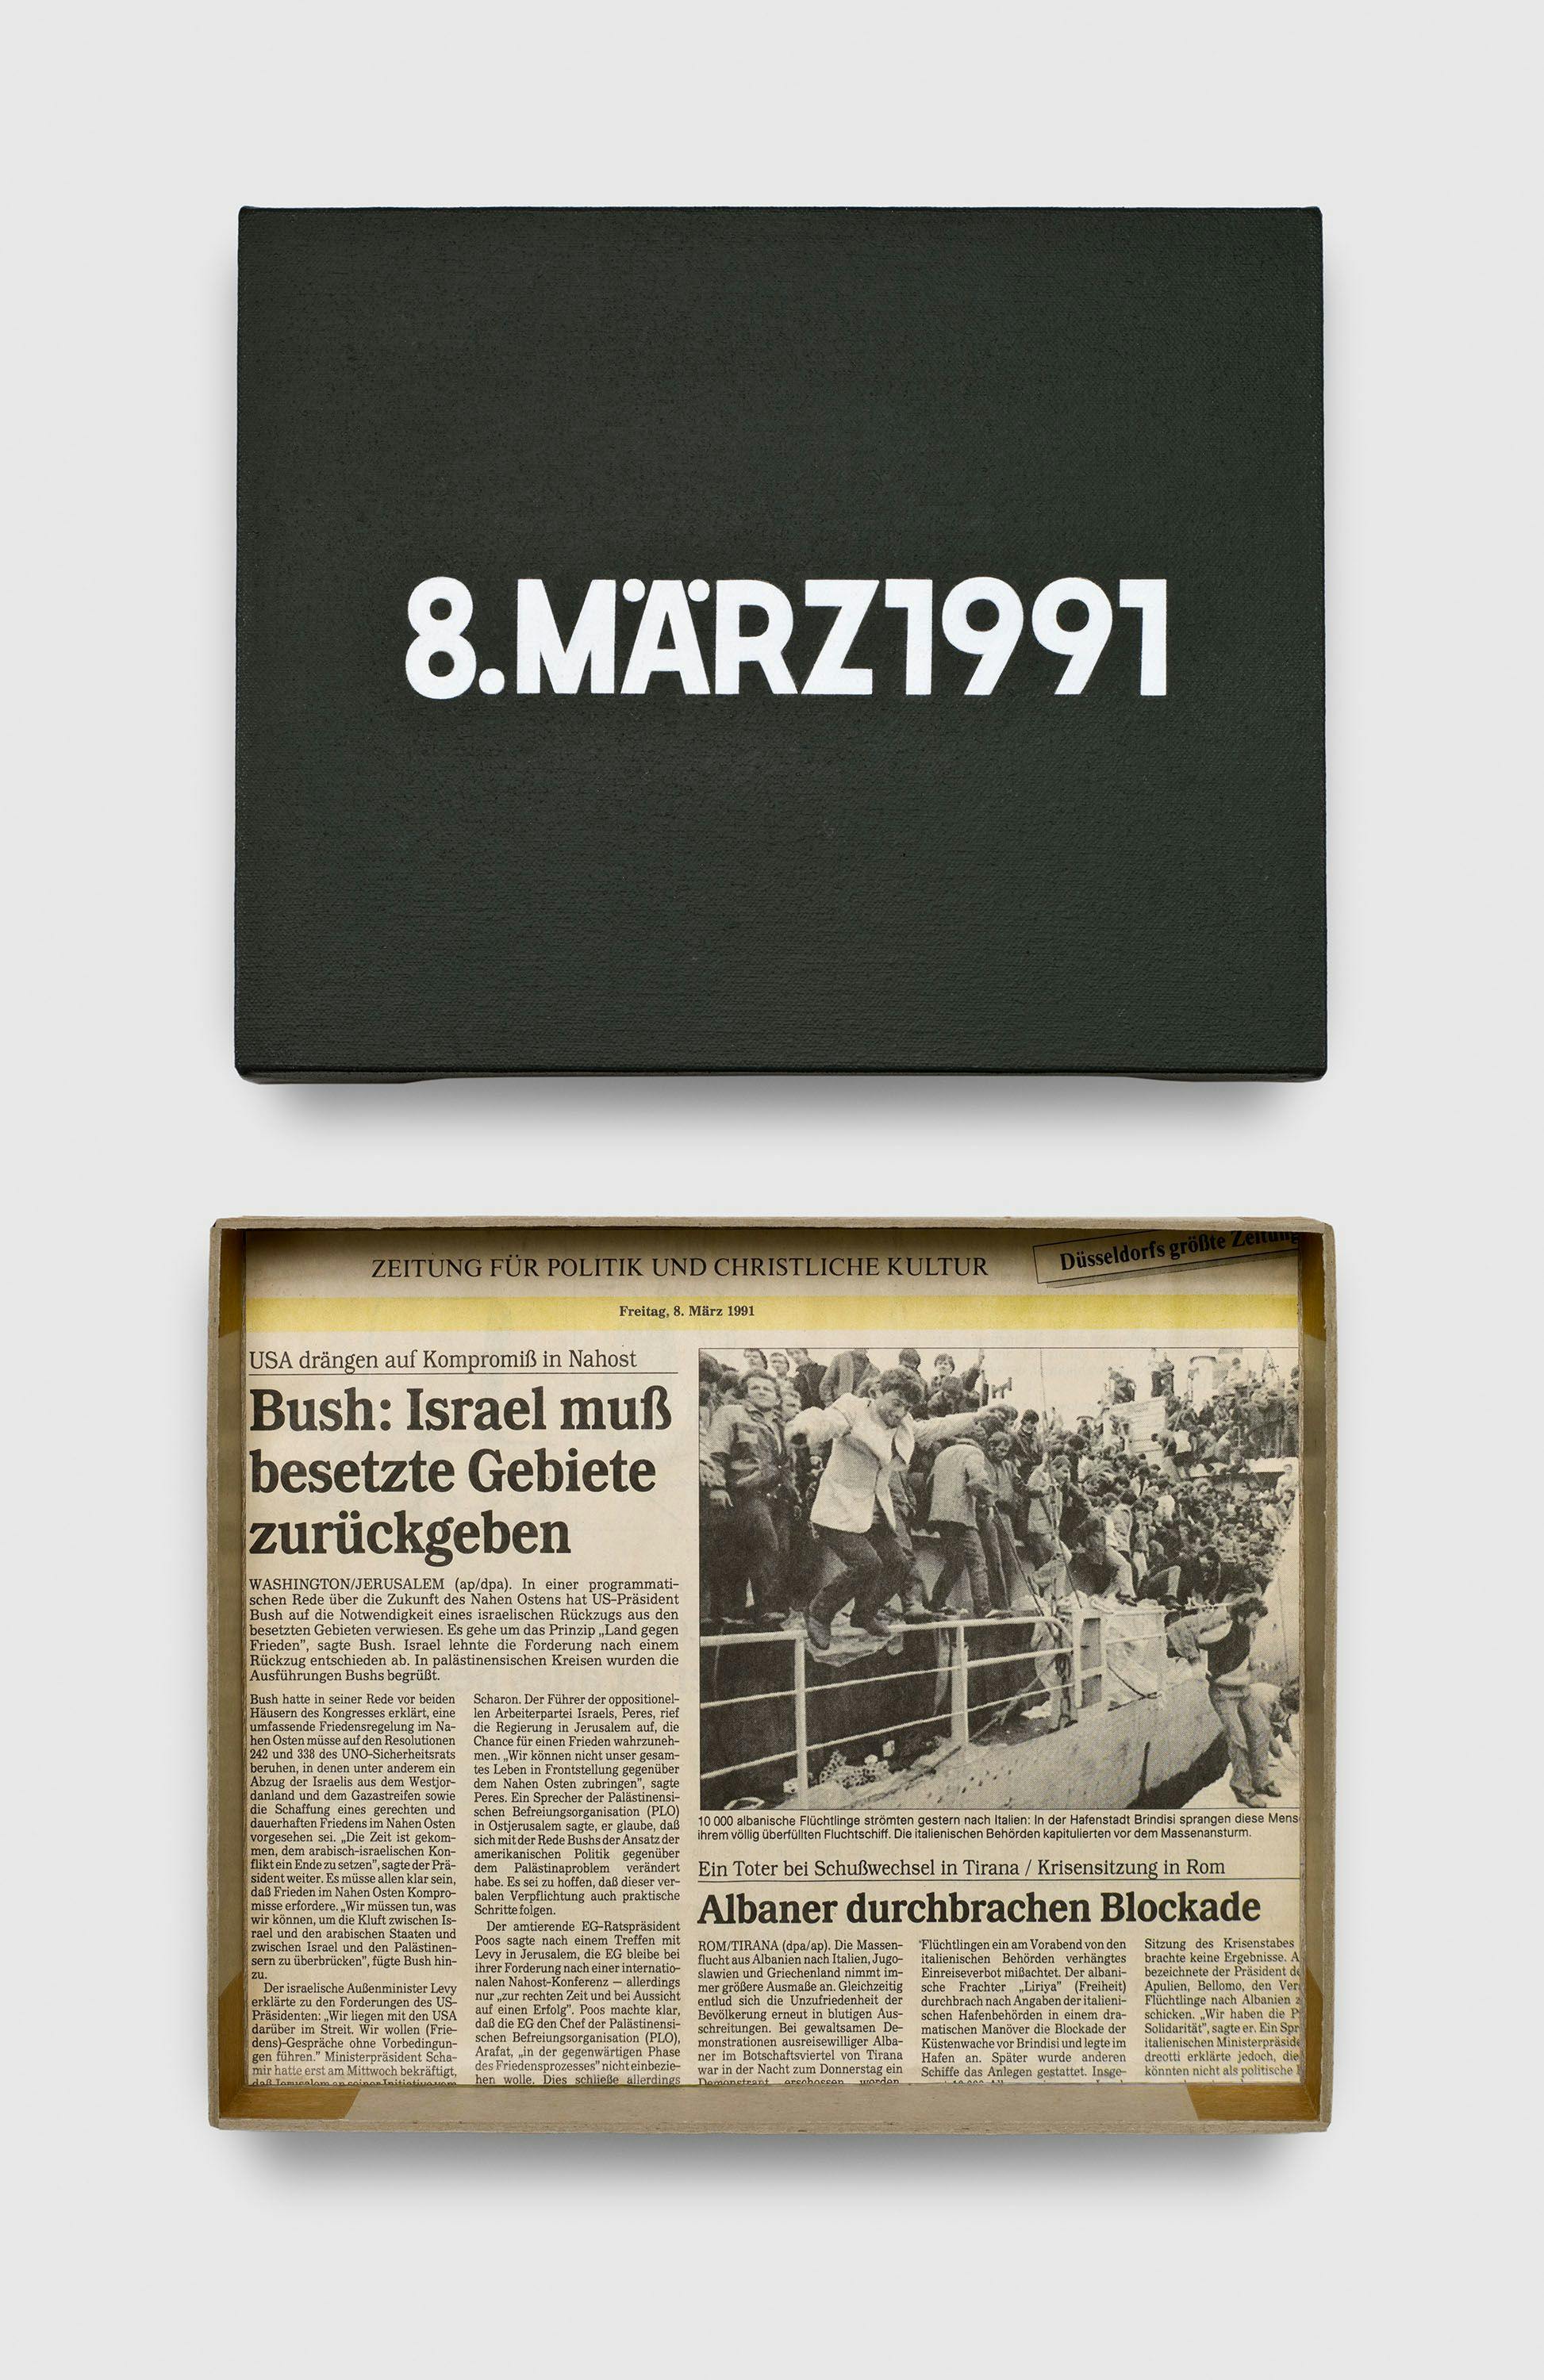 An untitled painting by On Kawara, titled 8. M√ÑRZ 1991, dated 1991.